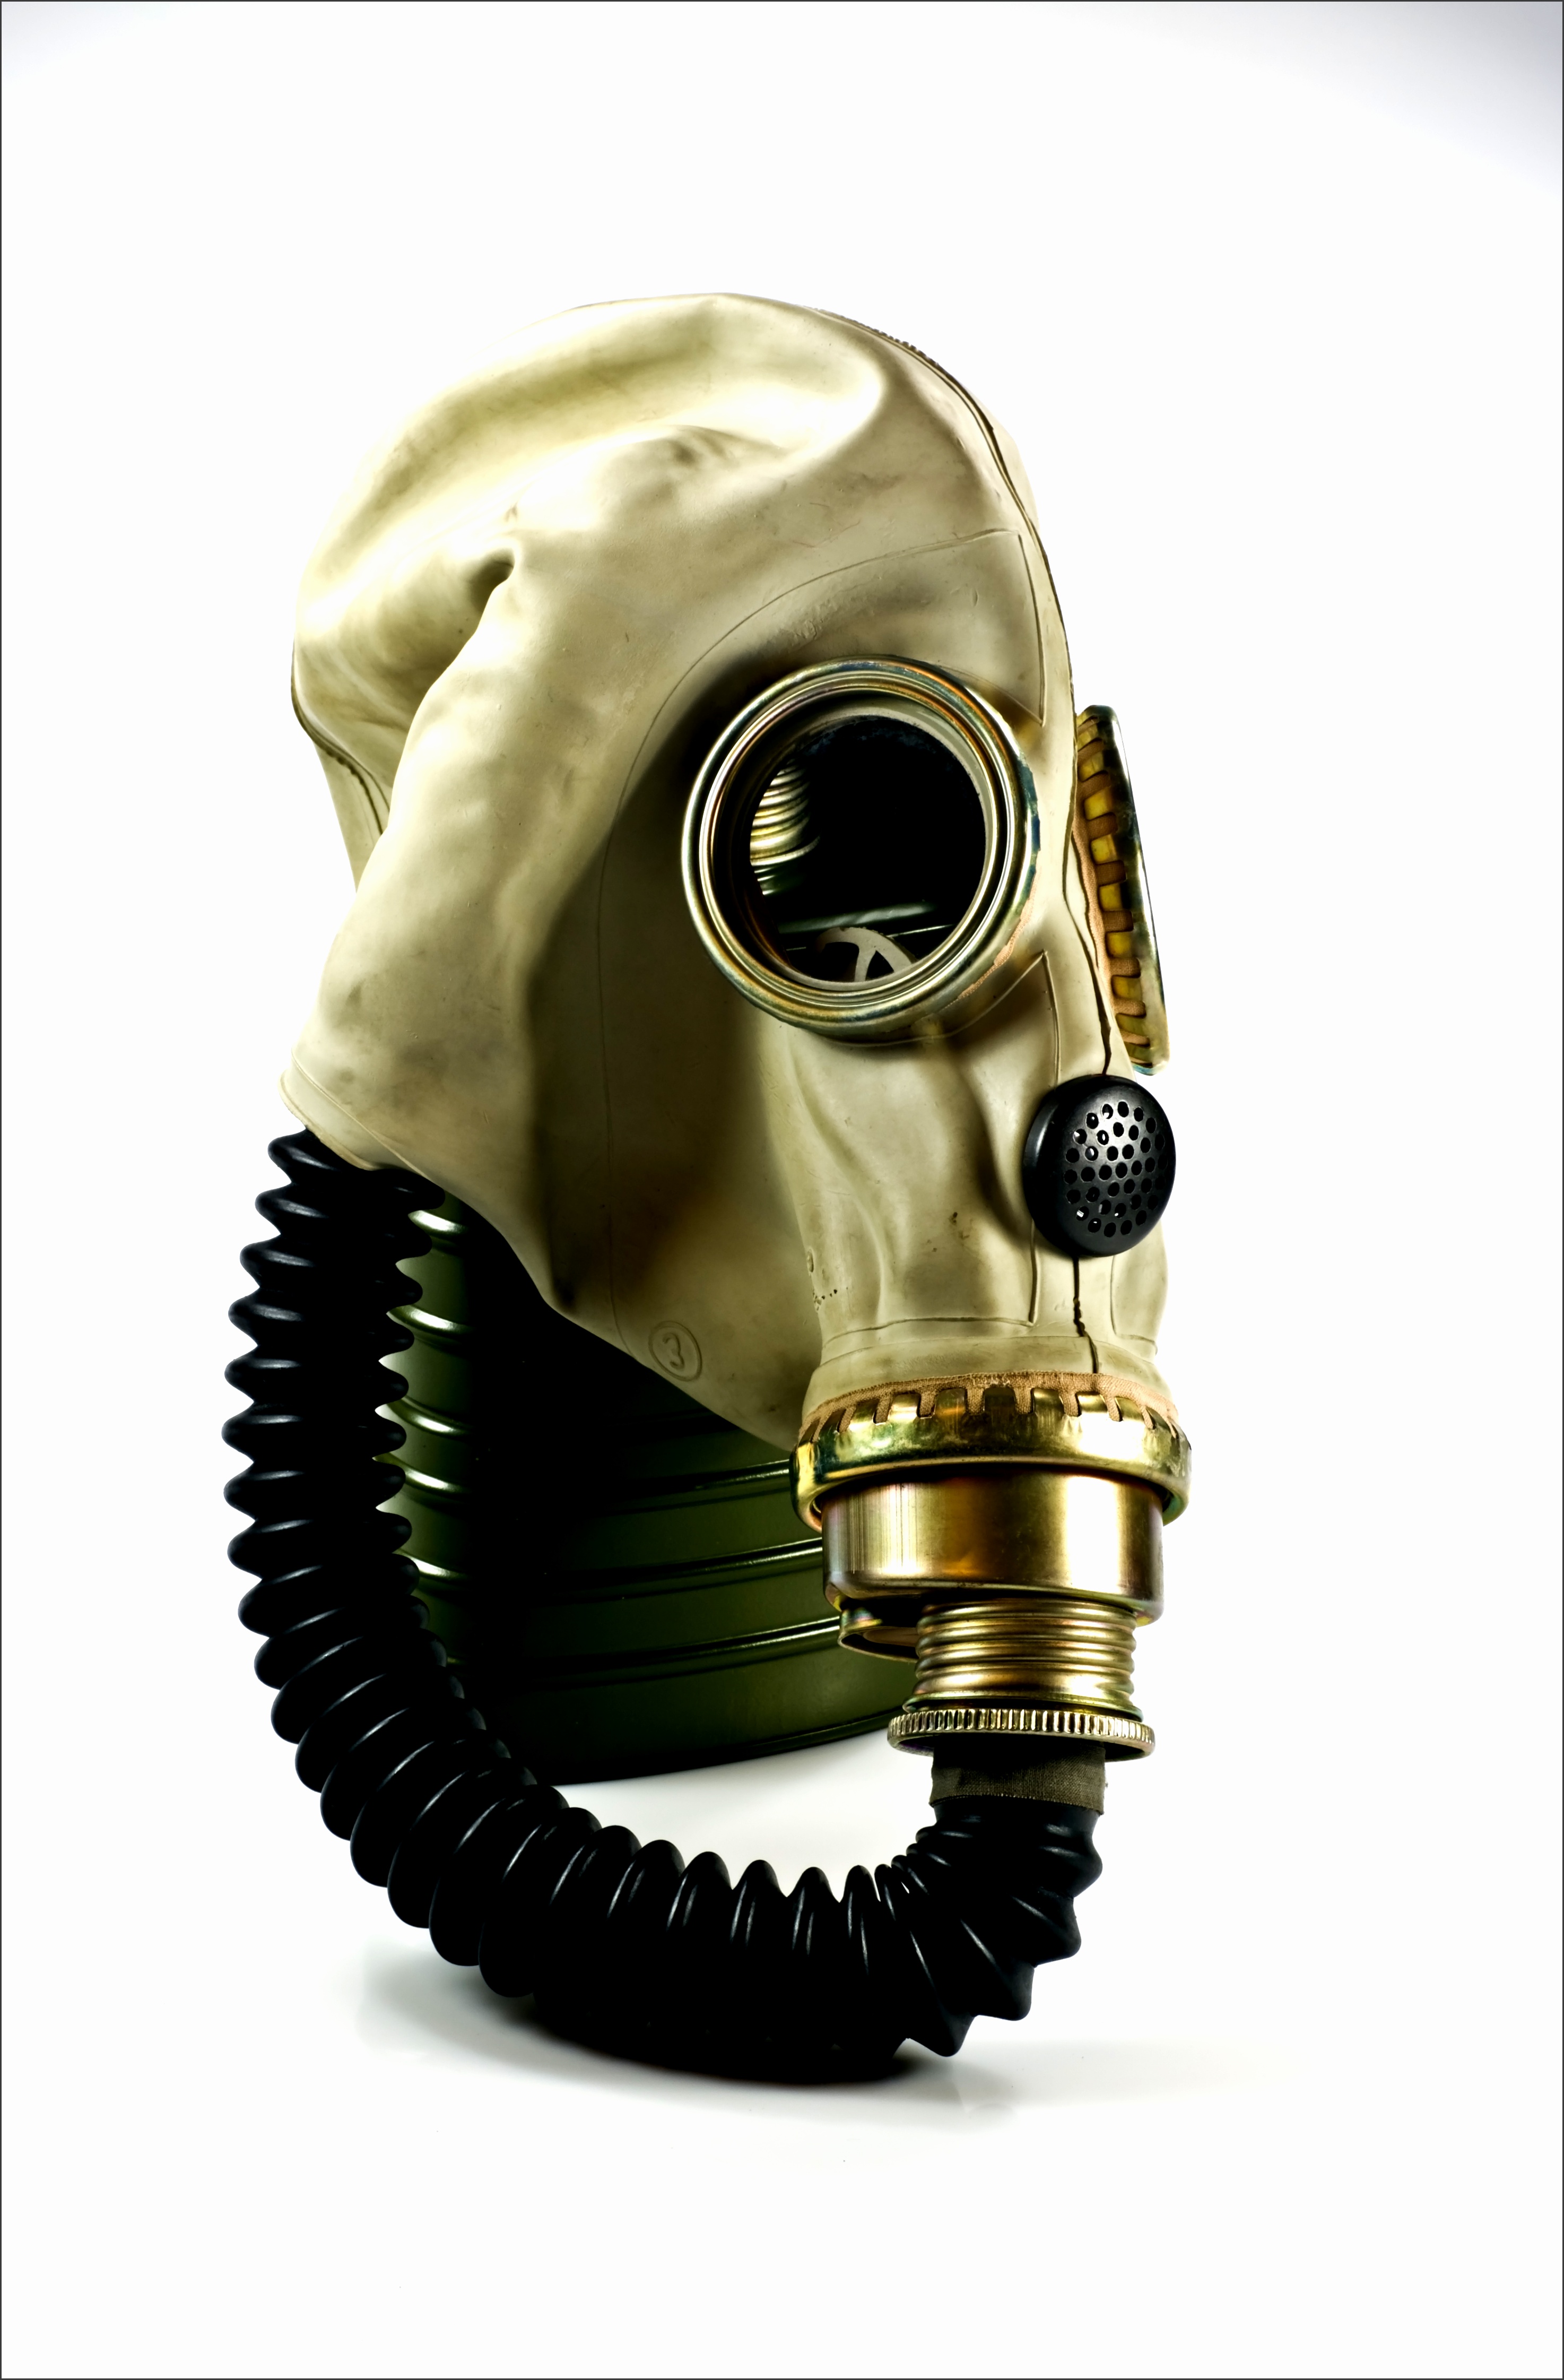 A Polish MUA gas mask used in the 1970s and 1980s